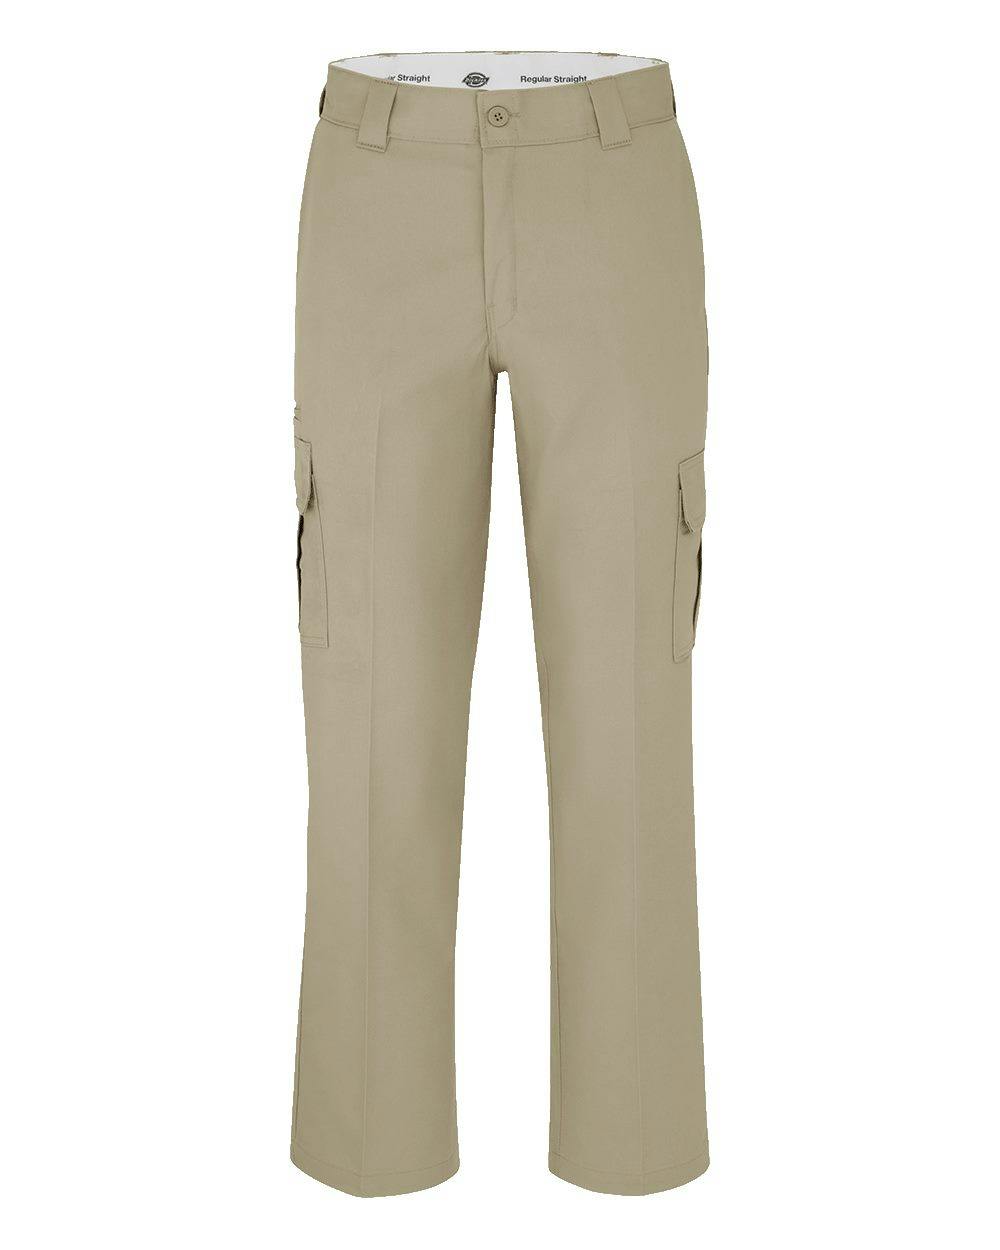 Image for Cargo Pants - WP95